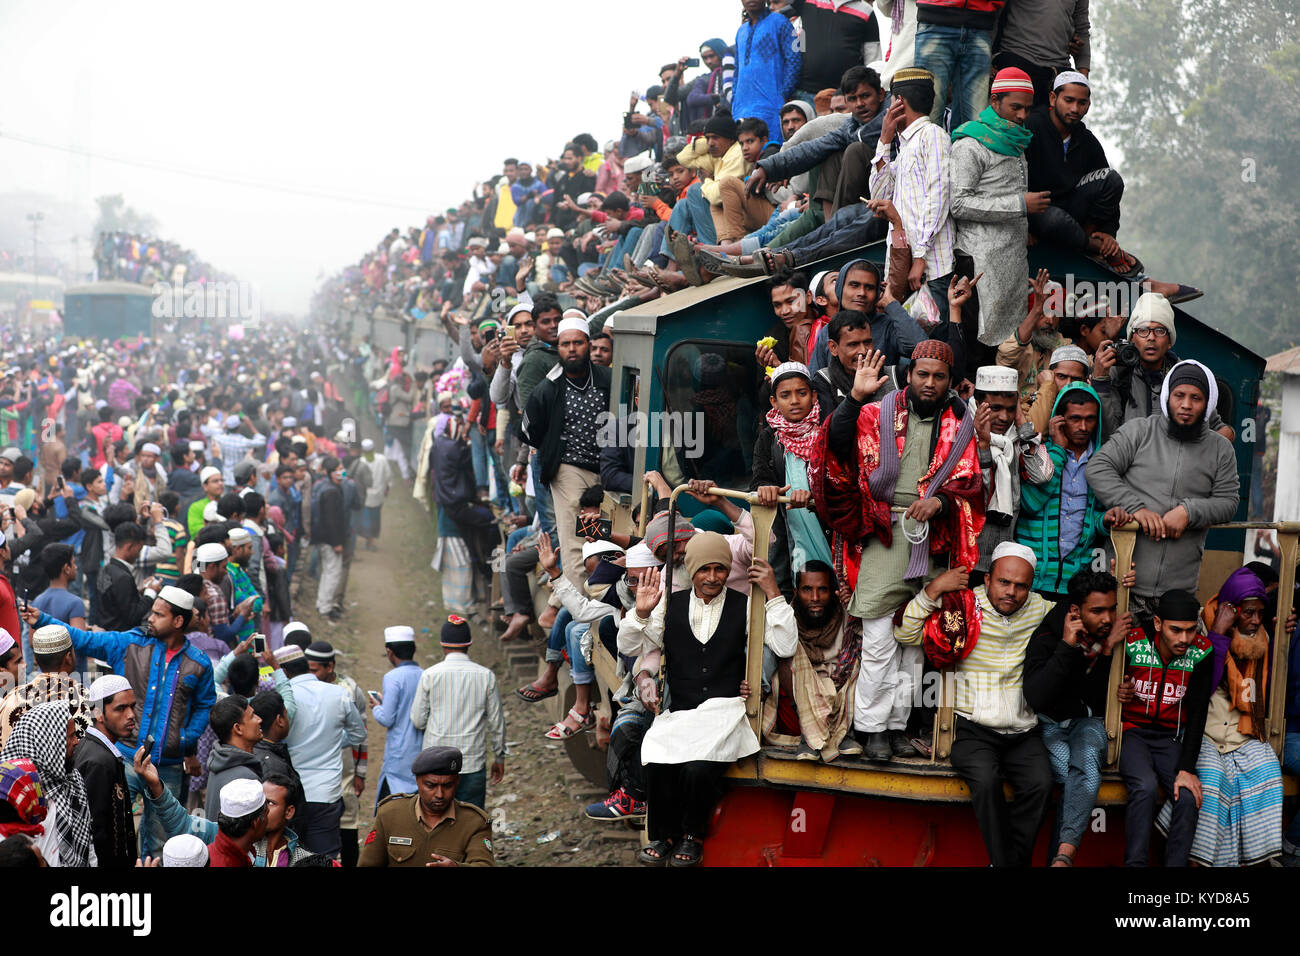 Dhaka, Bangladesh. 14th Jan, 2018.  Bangladeshi Muslim devotees return home in an over-crowded train after attends the Akheri Munajat or the Final Prayer on the last day of Biswa Ijtema, the second largest World Congregation of Muslims at Tongi, on the outskirts of Dhaka, Bangladesh. The first phase of Biswa Ijtema ends today with Akheri Munajat, or the Final Prayer, and Muslim devotees from across the world participated in the second largest world congregation of Muslims. Credit: SK Hasan Ali/Alamy Live News Stock Photo